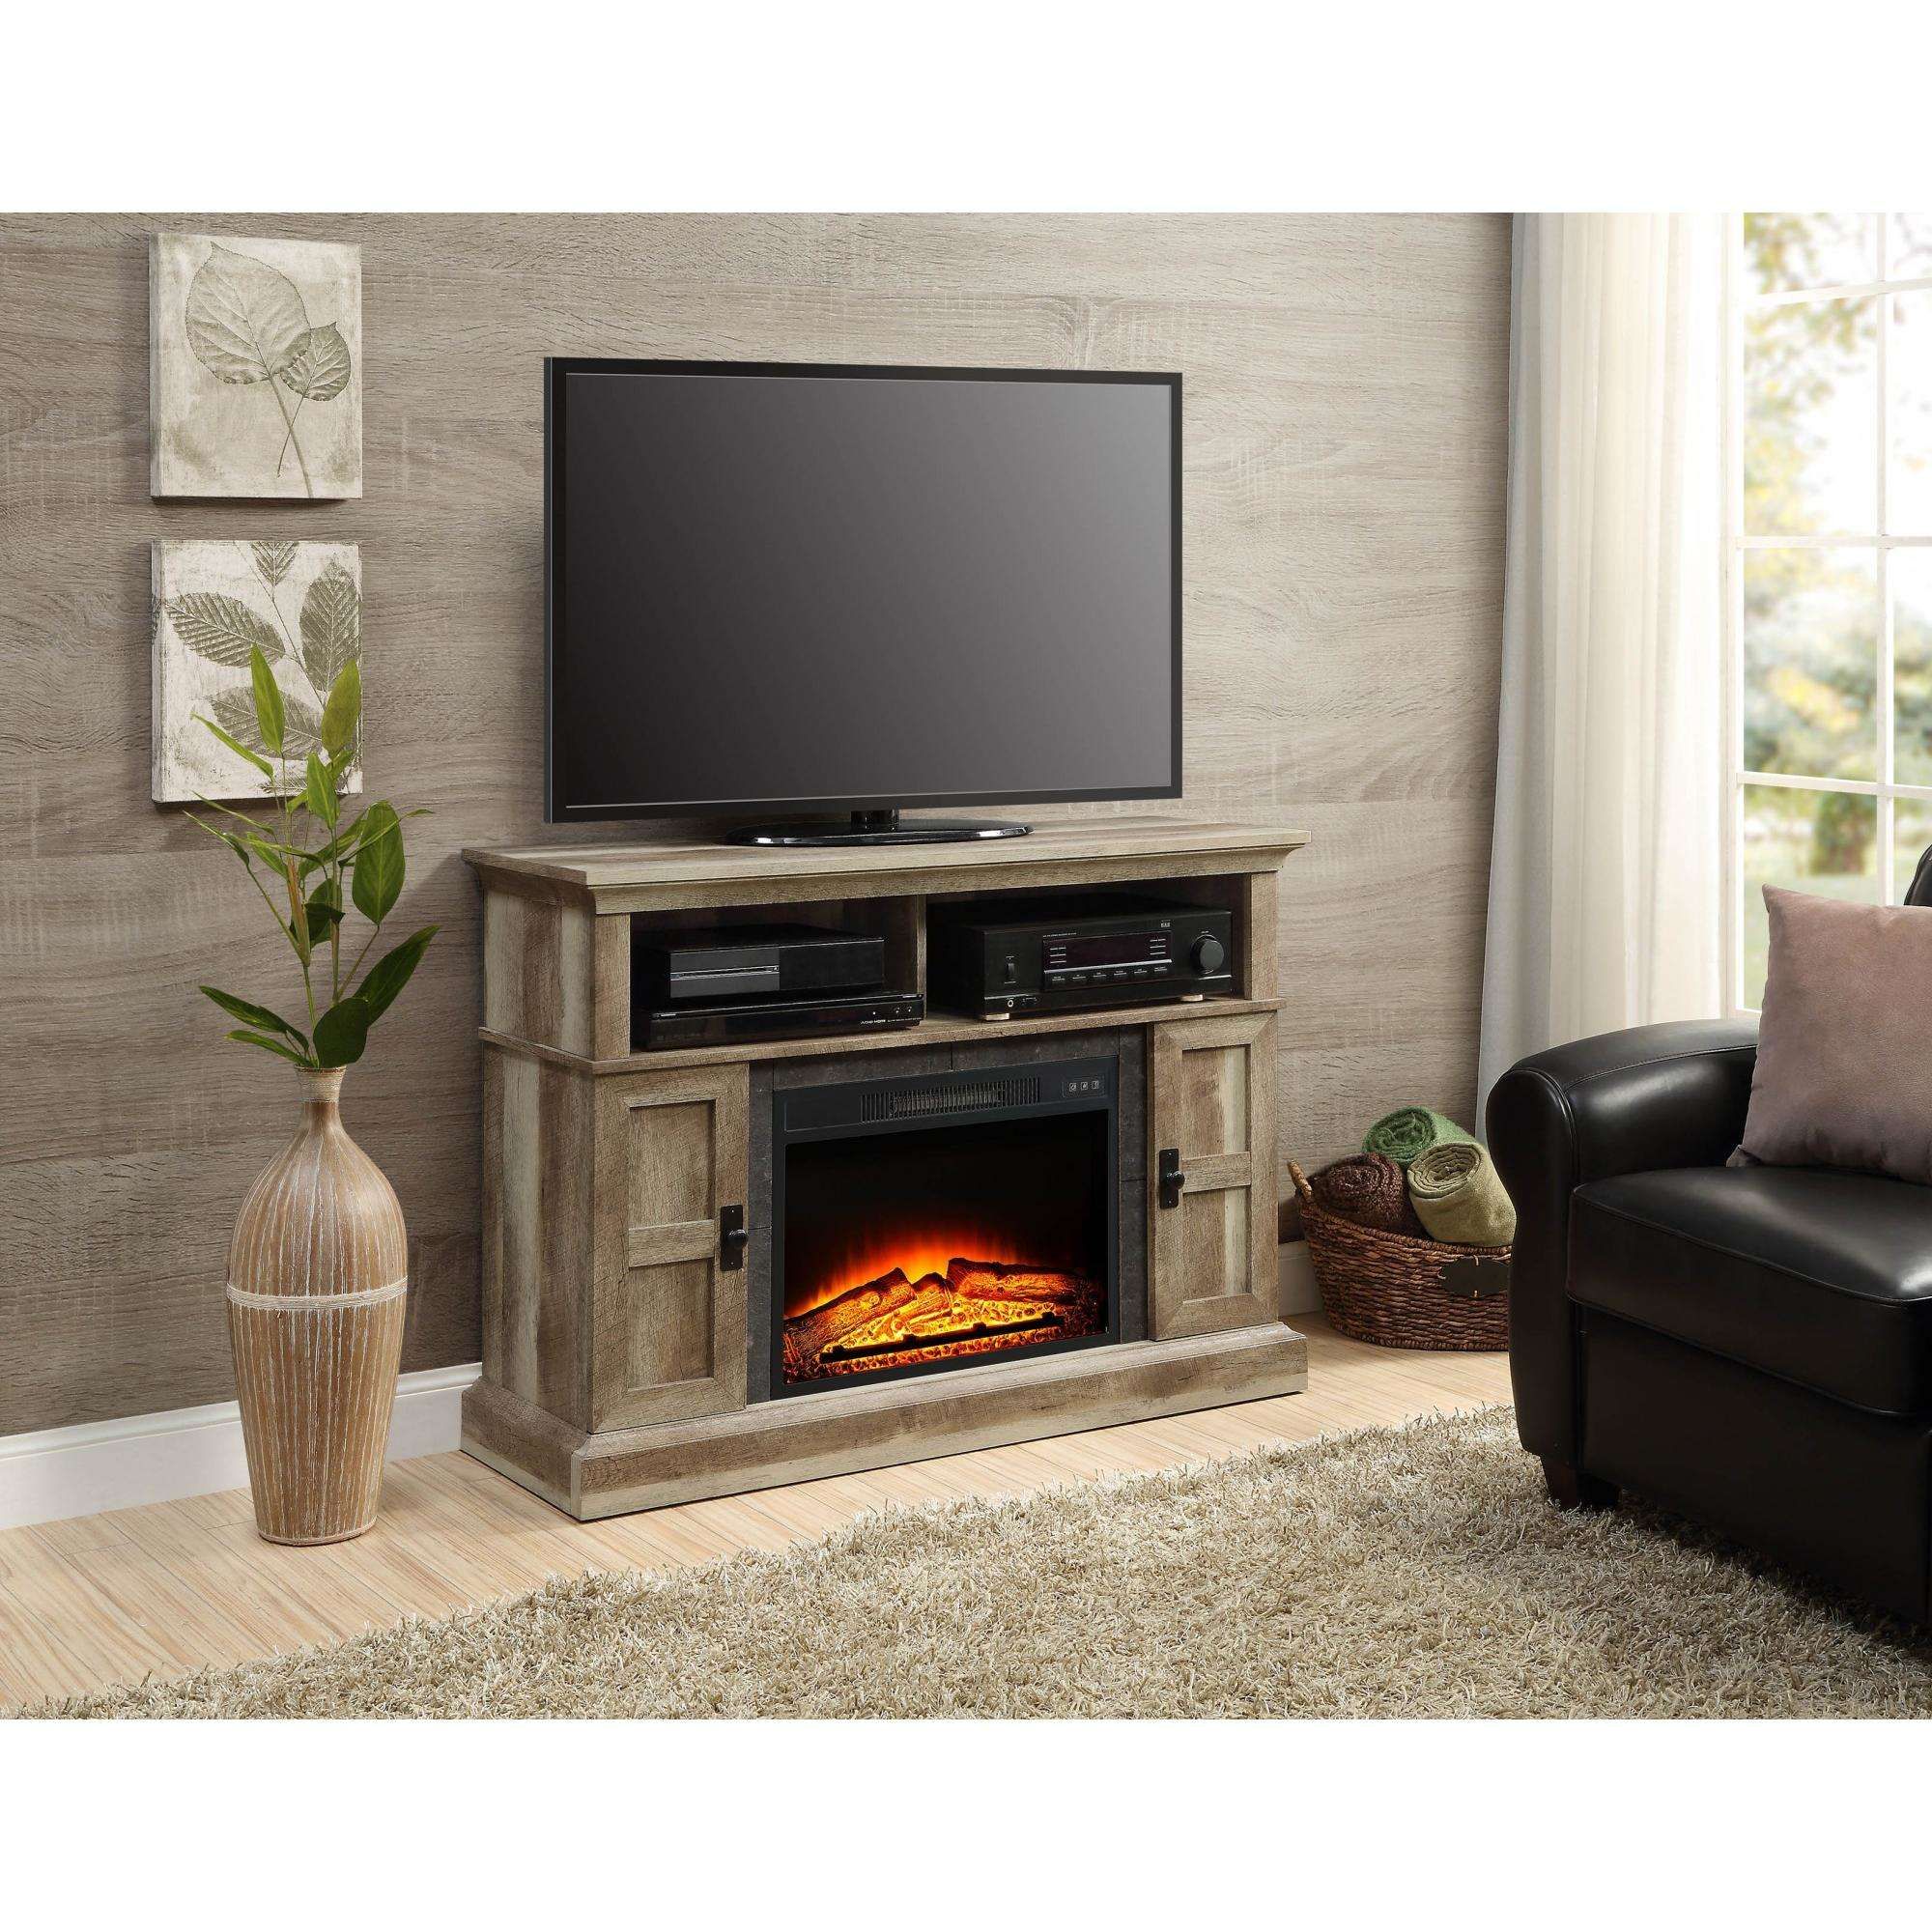 Fireplace Tv Stand Beautiful Whalen Media Fireplace for Your Home Television Stand Fits